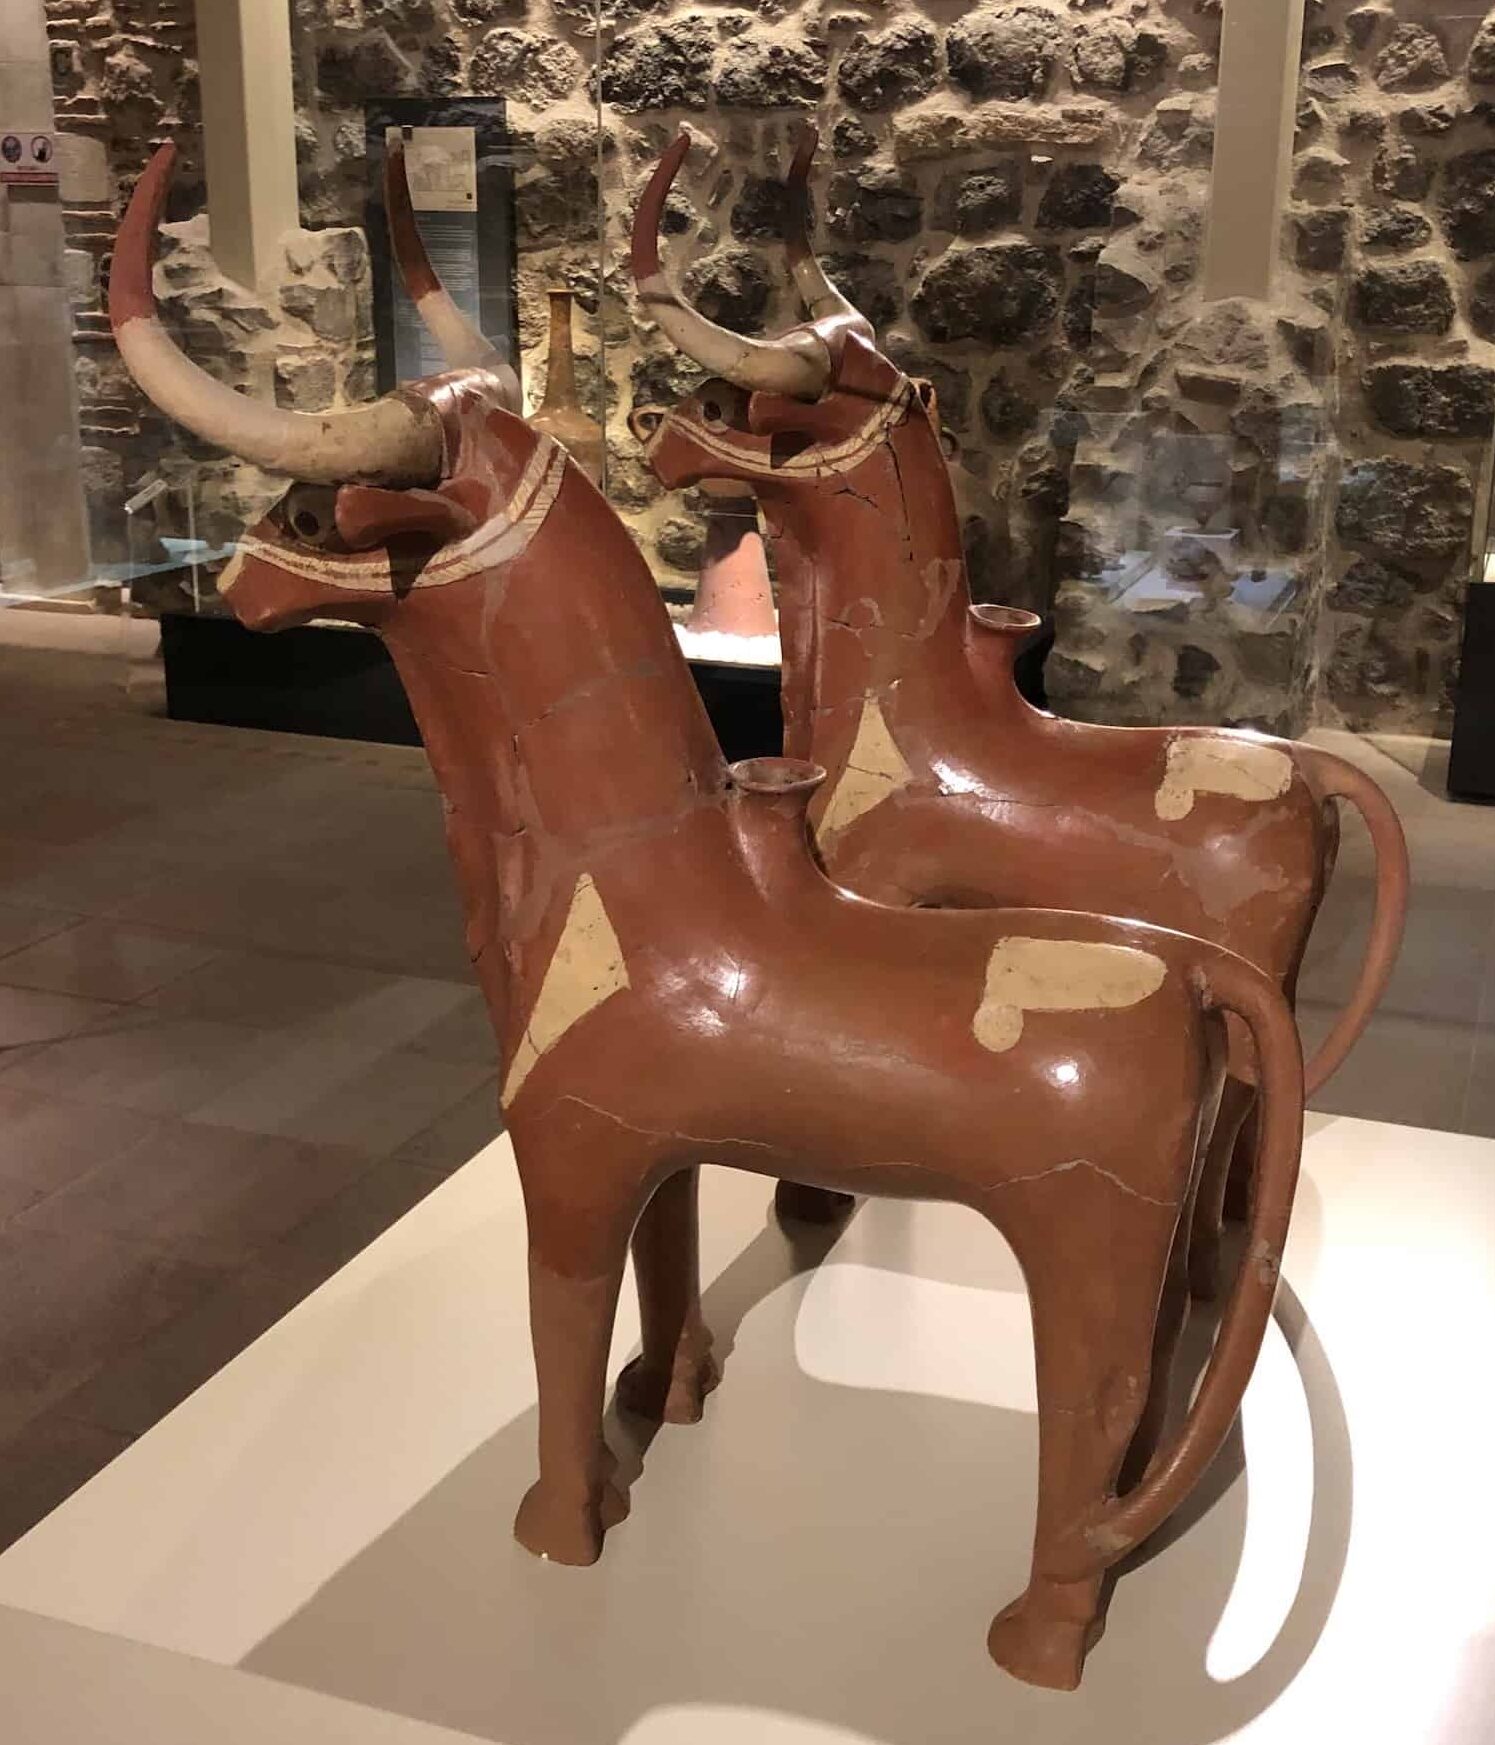 Ceremonial vessels in the shape of sacred bulls